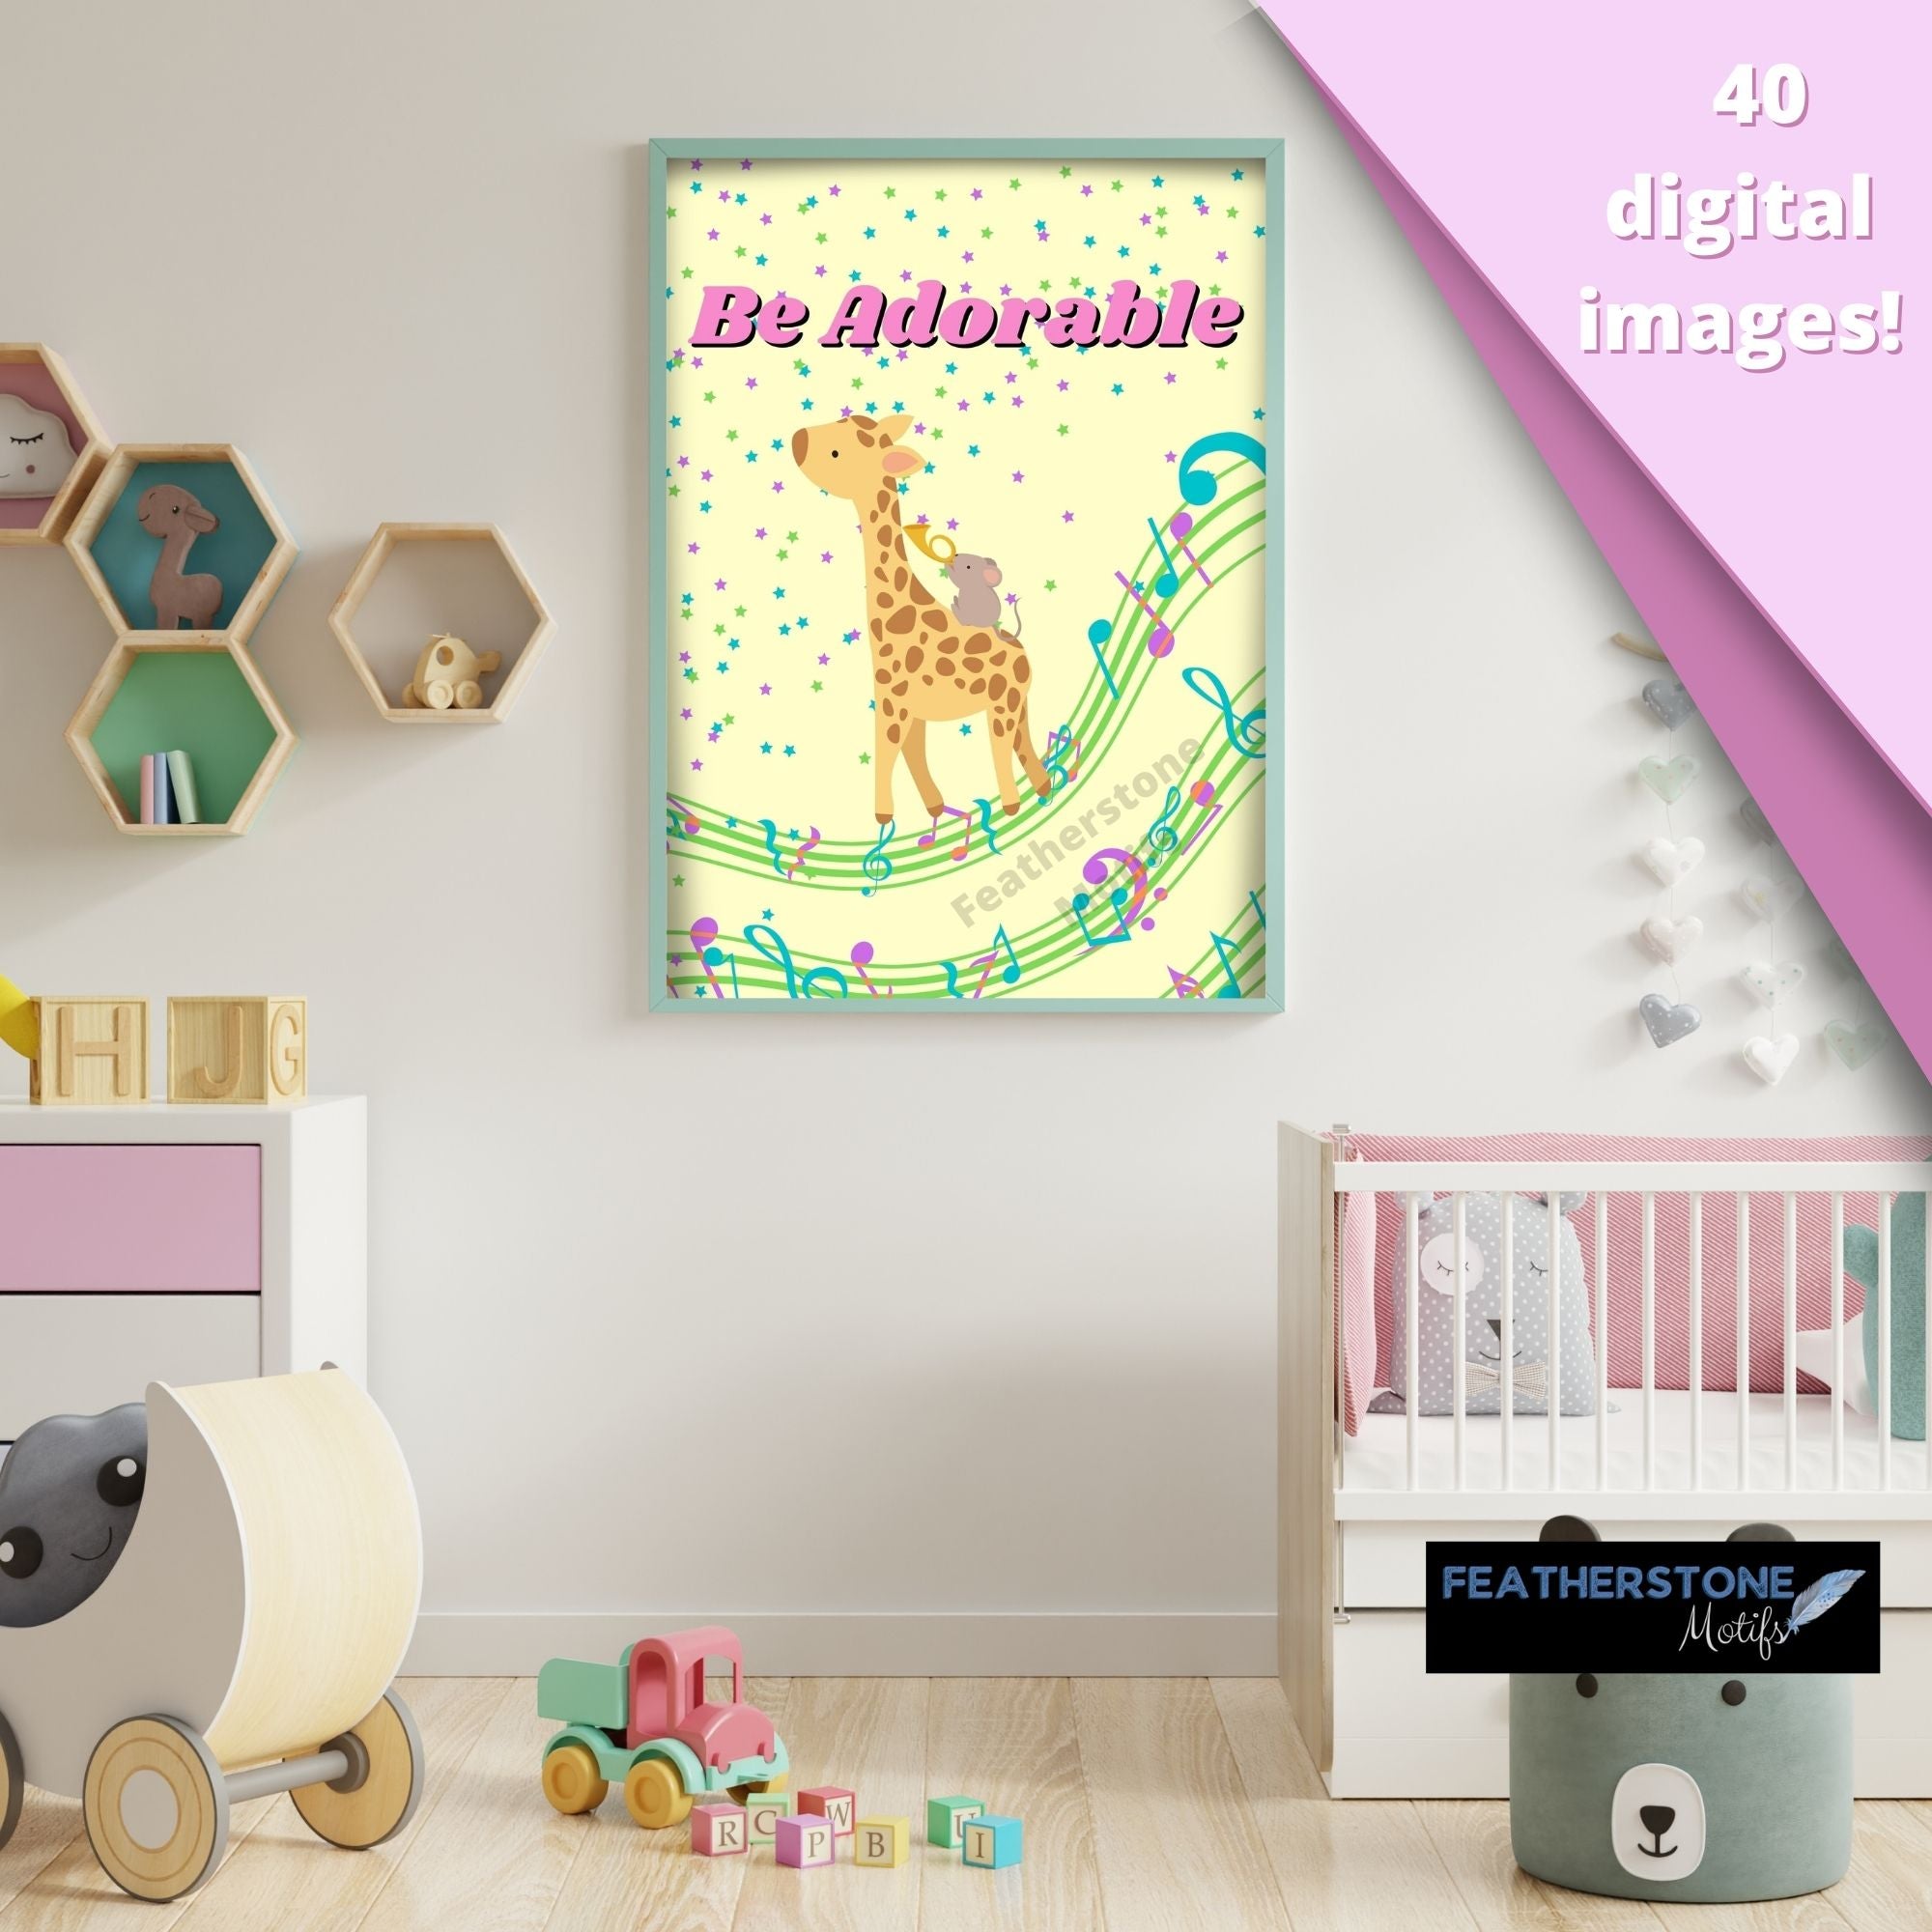 The Be YOU! digital download features 8 designs in 5 different colors for a total of 40 different images! Each image has an animal - lion, hippo, cow, turtle, giraffe, rino, fox, and elephant - playing a musical instrument with an inspirational message to "Be" joyful, brave, peaceful, kind, adorable, awesome, playful, and cute. 